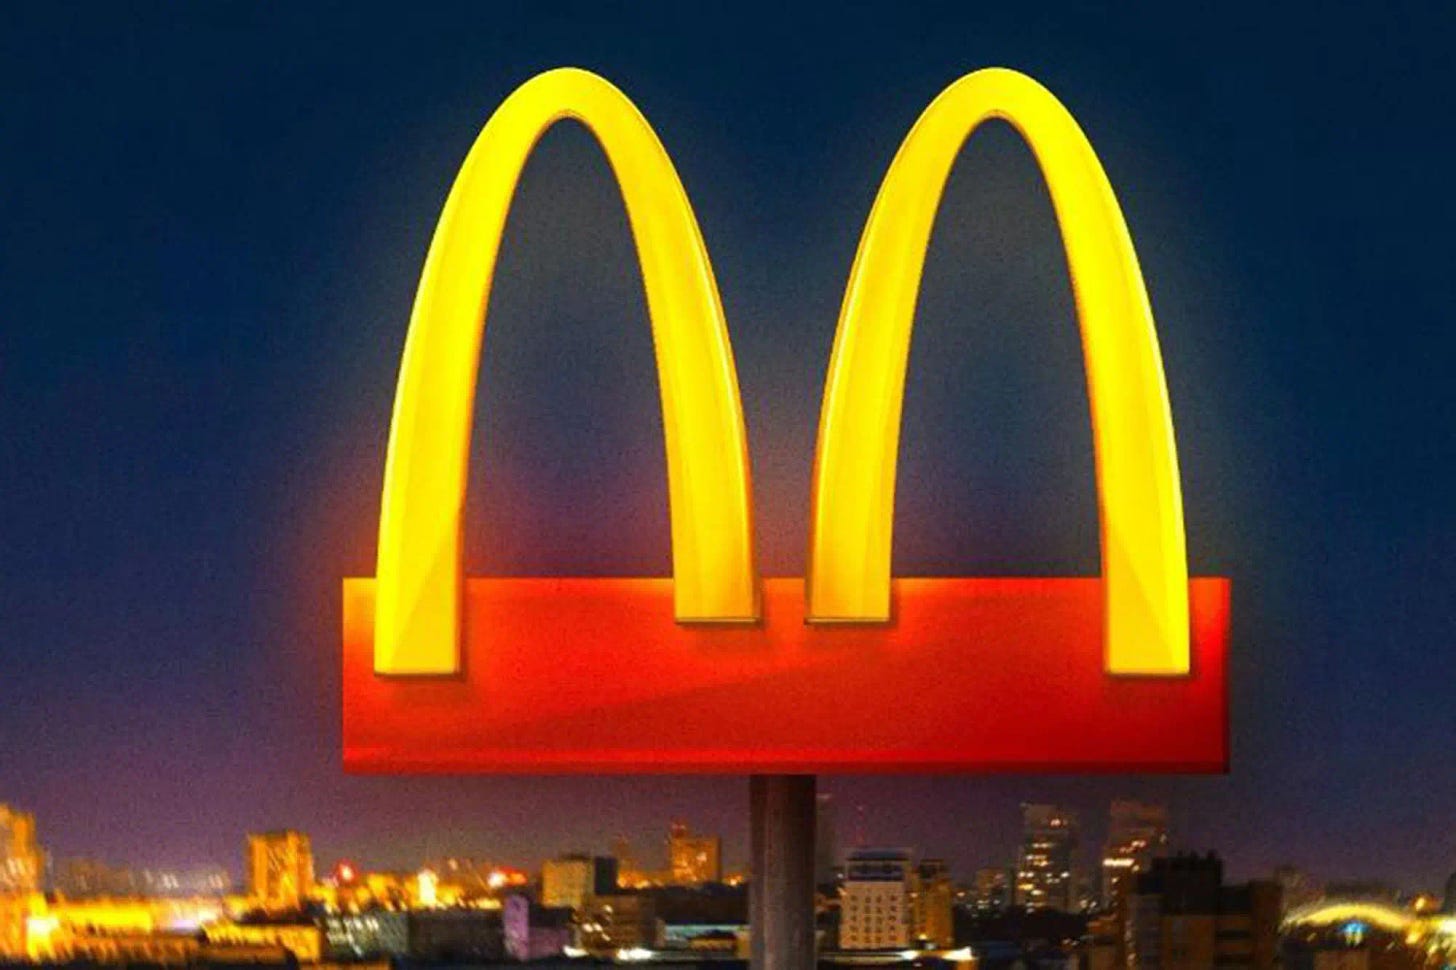 The golden arches on a red billboard, with a cityscape in the background